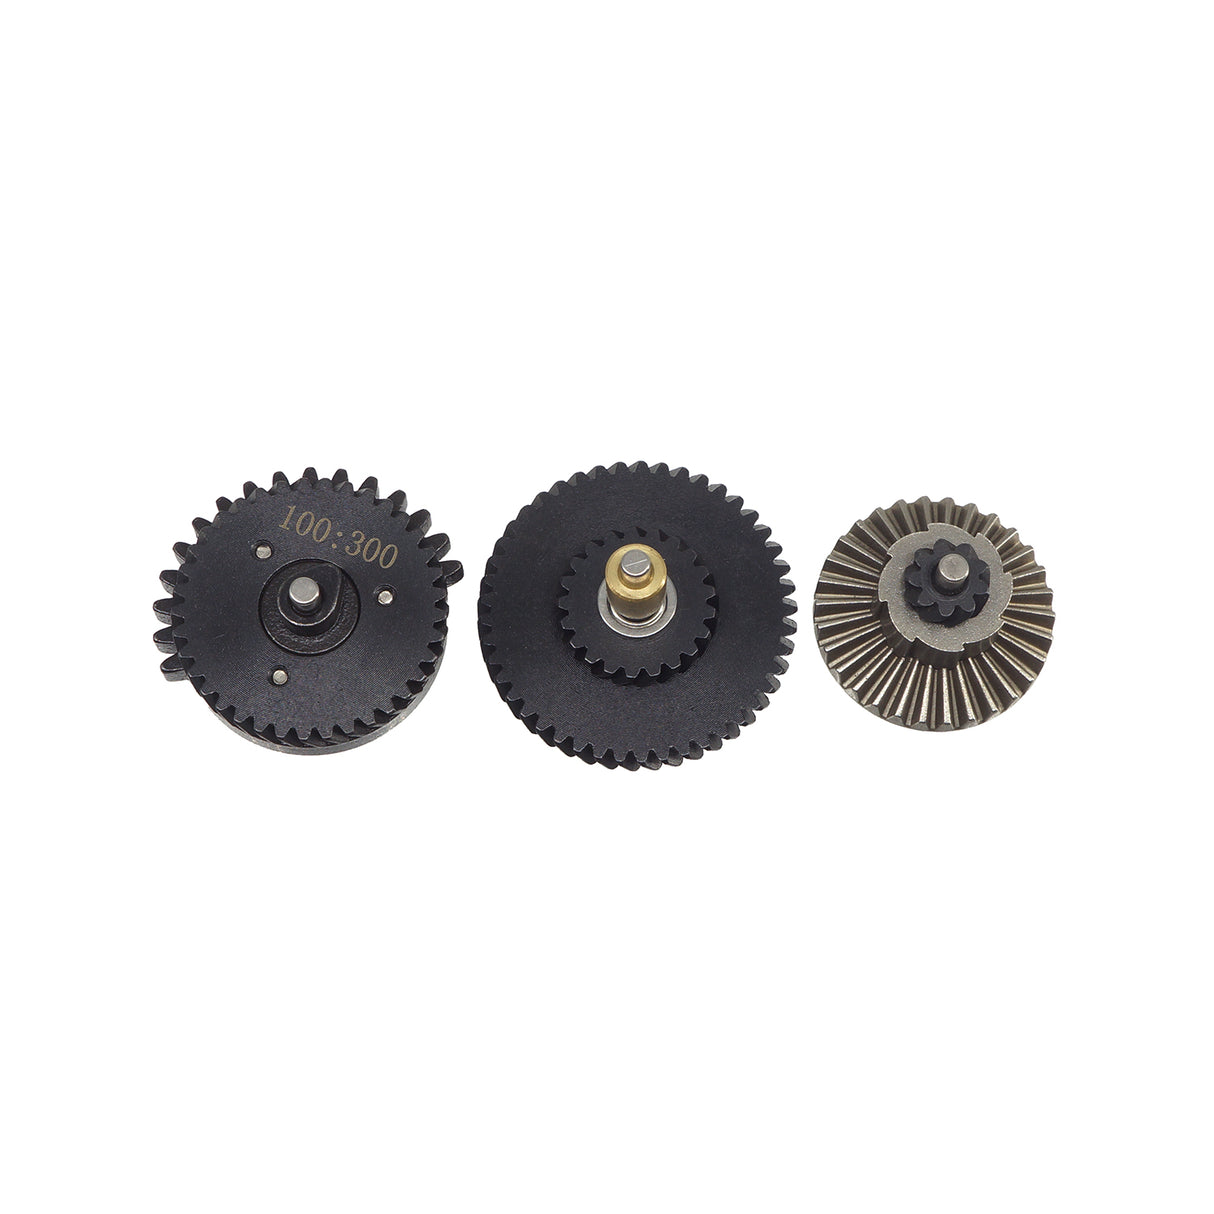 Army Force 100:300 3mm Steel CNC Bearing Gear Set for AEG Airosft ( AF-IN0189 )